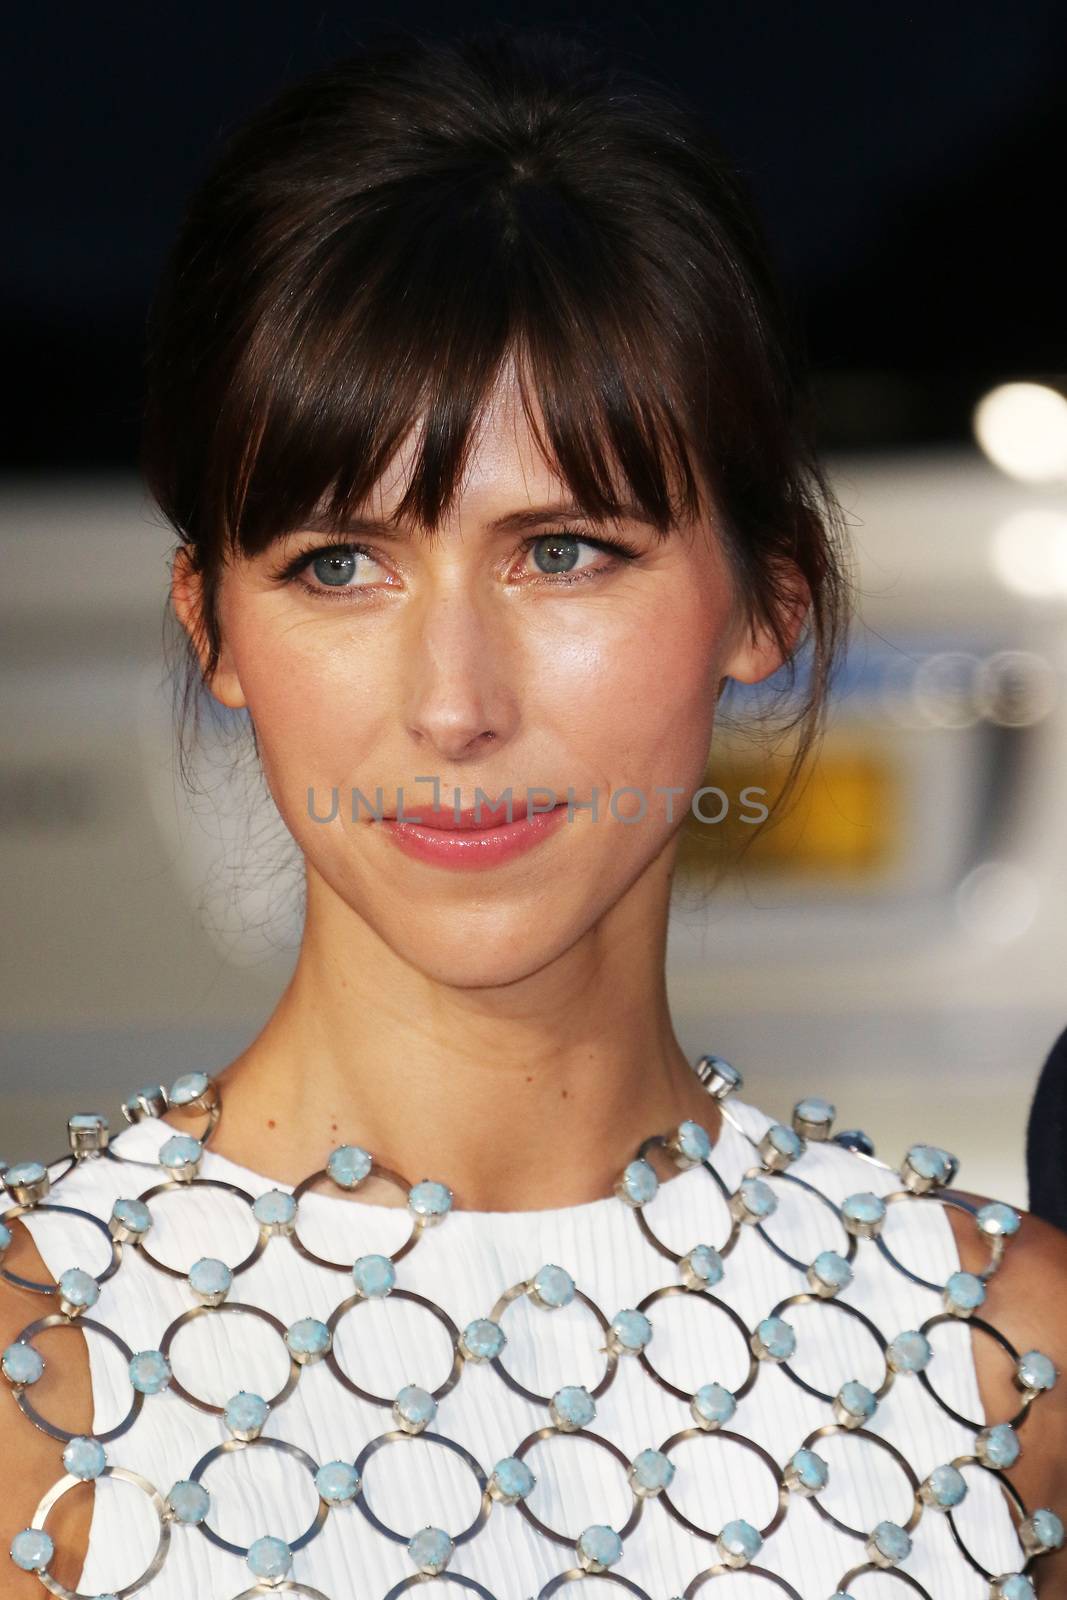 UNITED KINGDOM, London: Sophie Hunter attends the BFI London Film Festival screening of Black Mass at Odeon Leicester Square in London on October 11, 2015. 